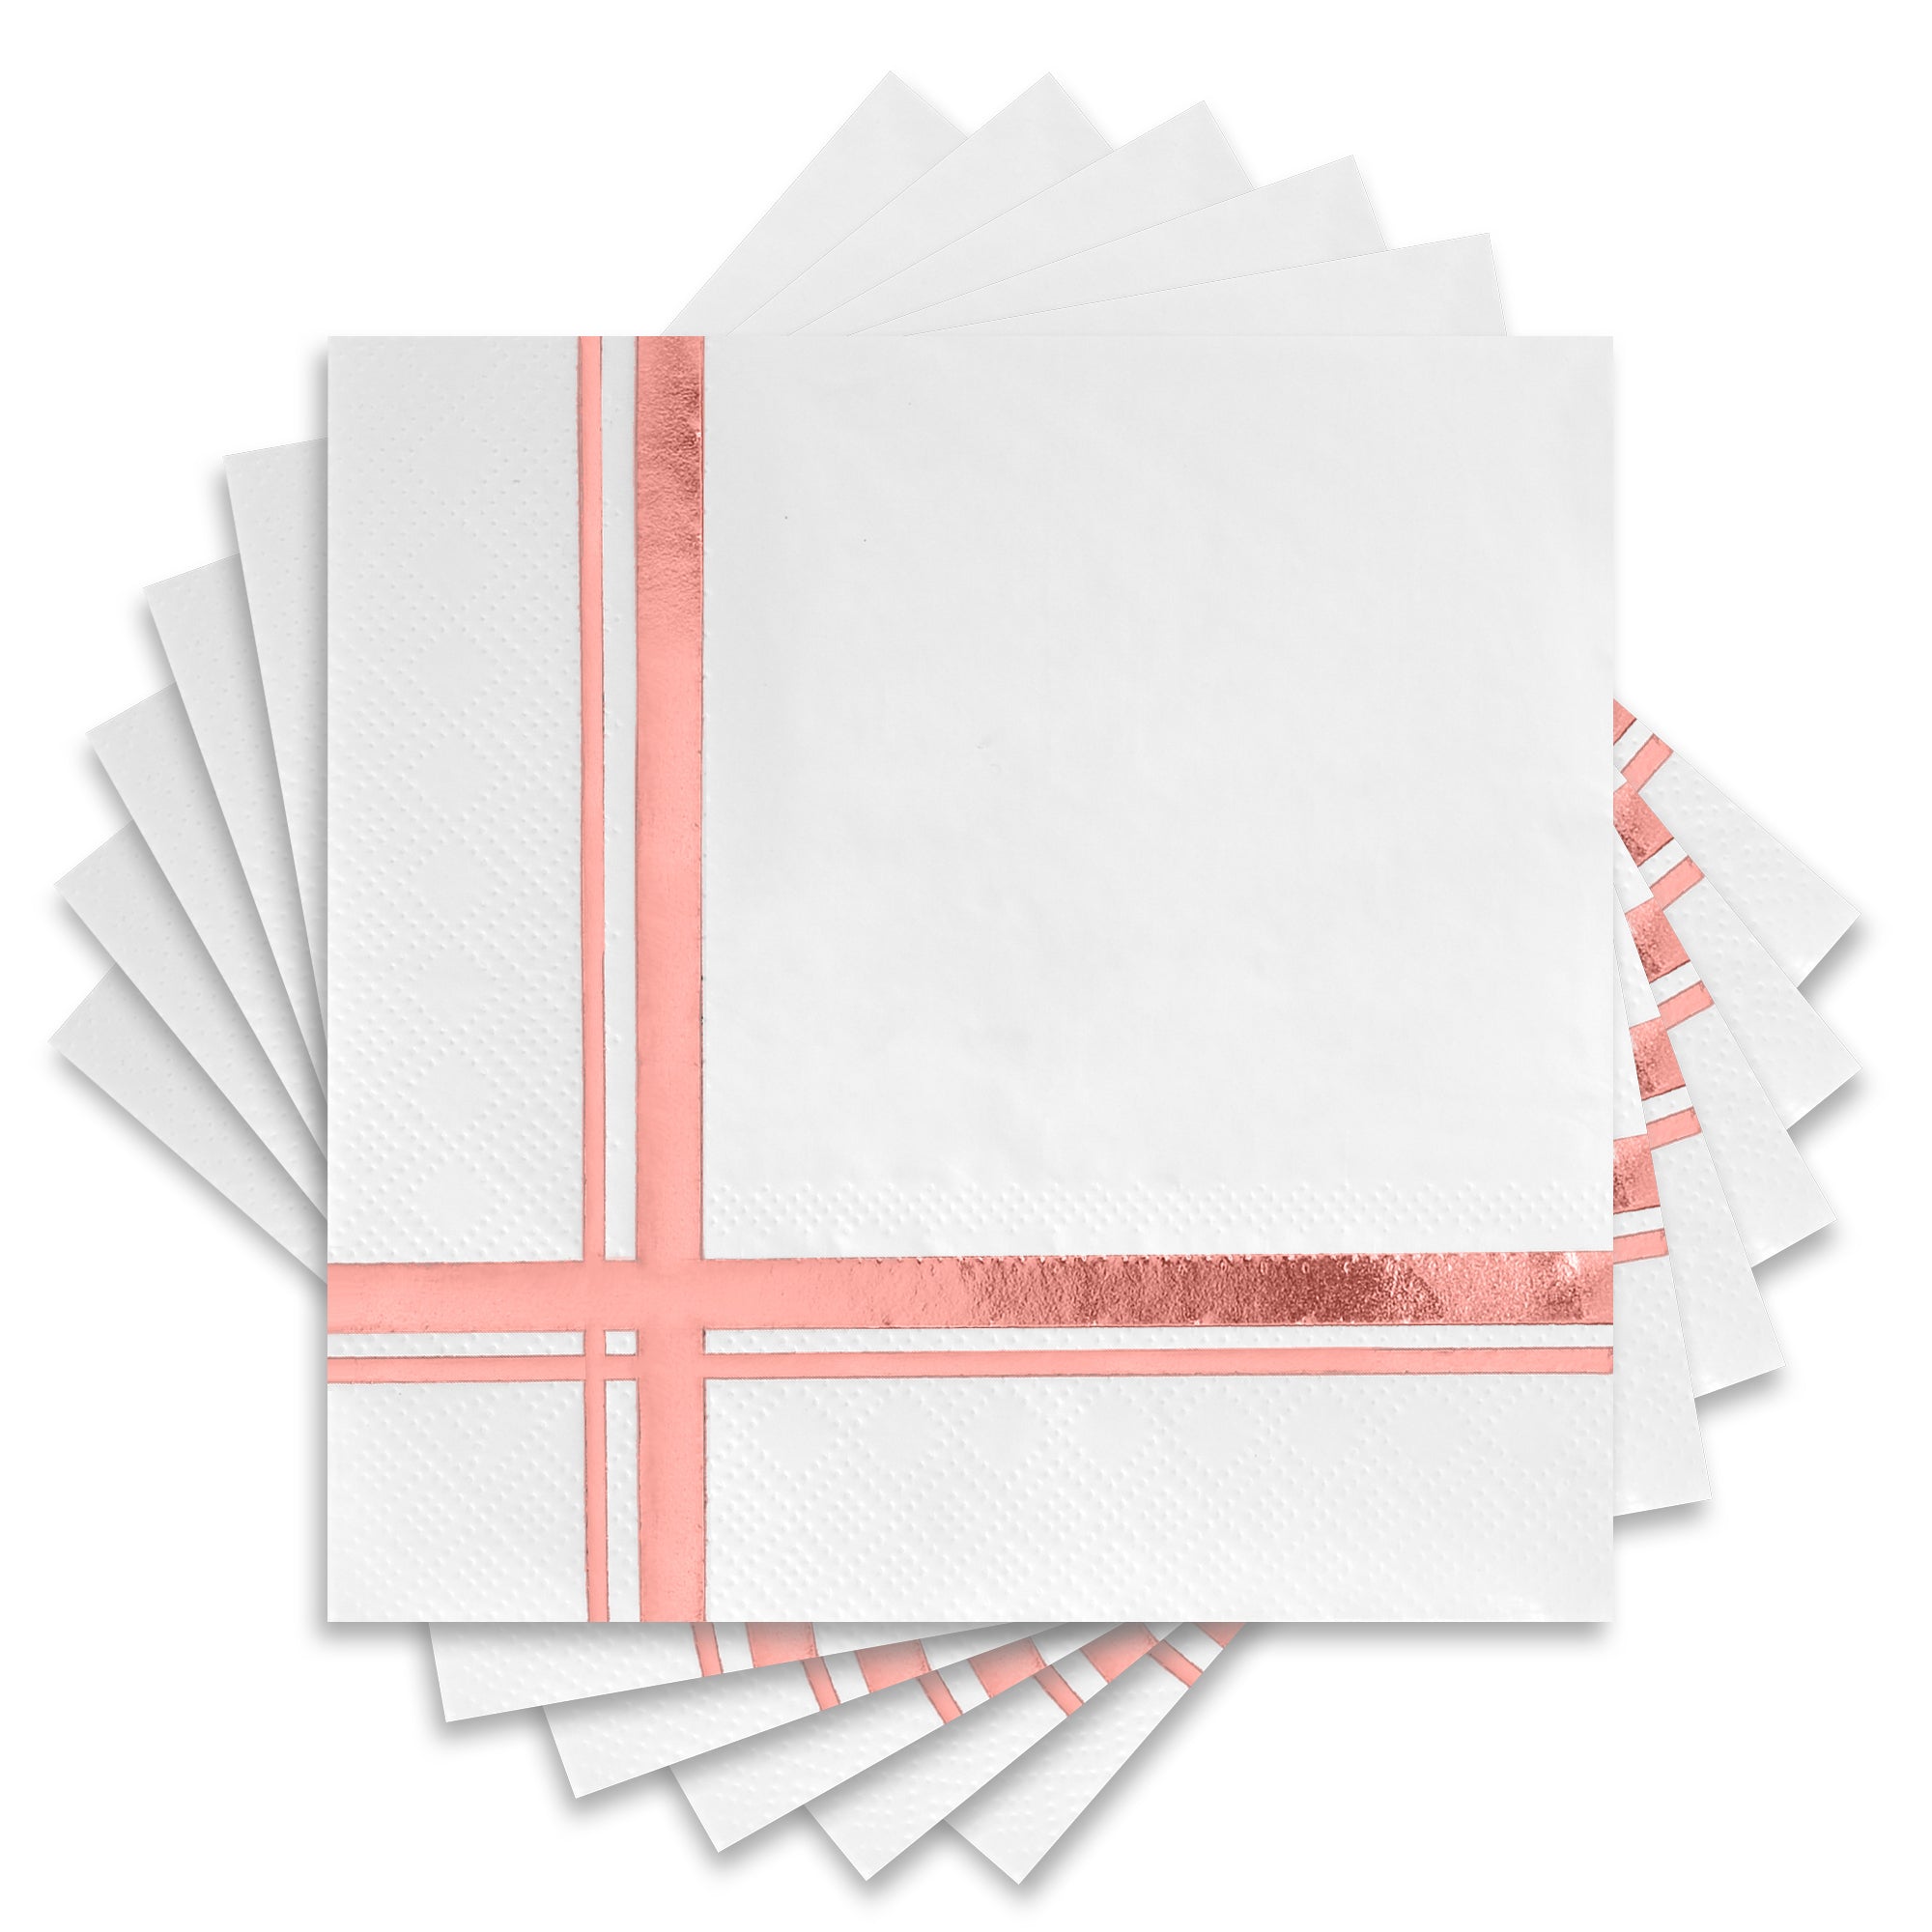 Fanxyware Rose Gold on White Cocktail Napkins - 100 Pack, 5 x 5, 3-Ply Paper - Style Name: Blissful Crossing